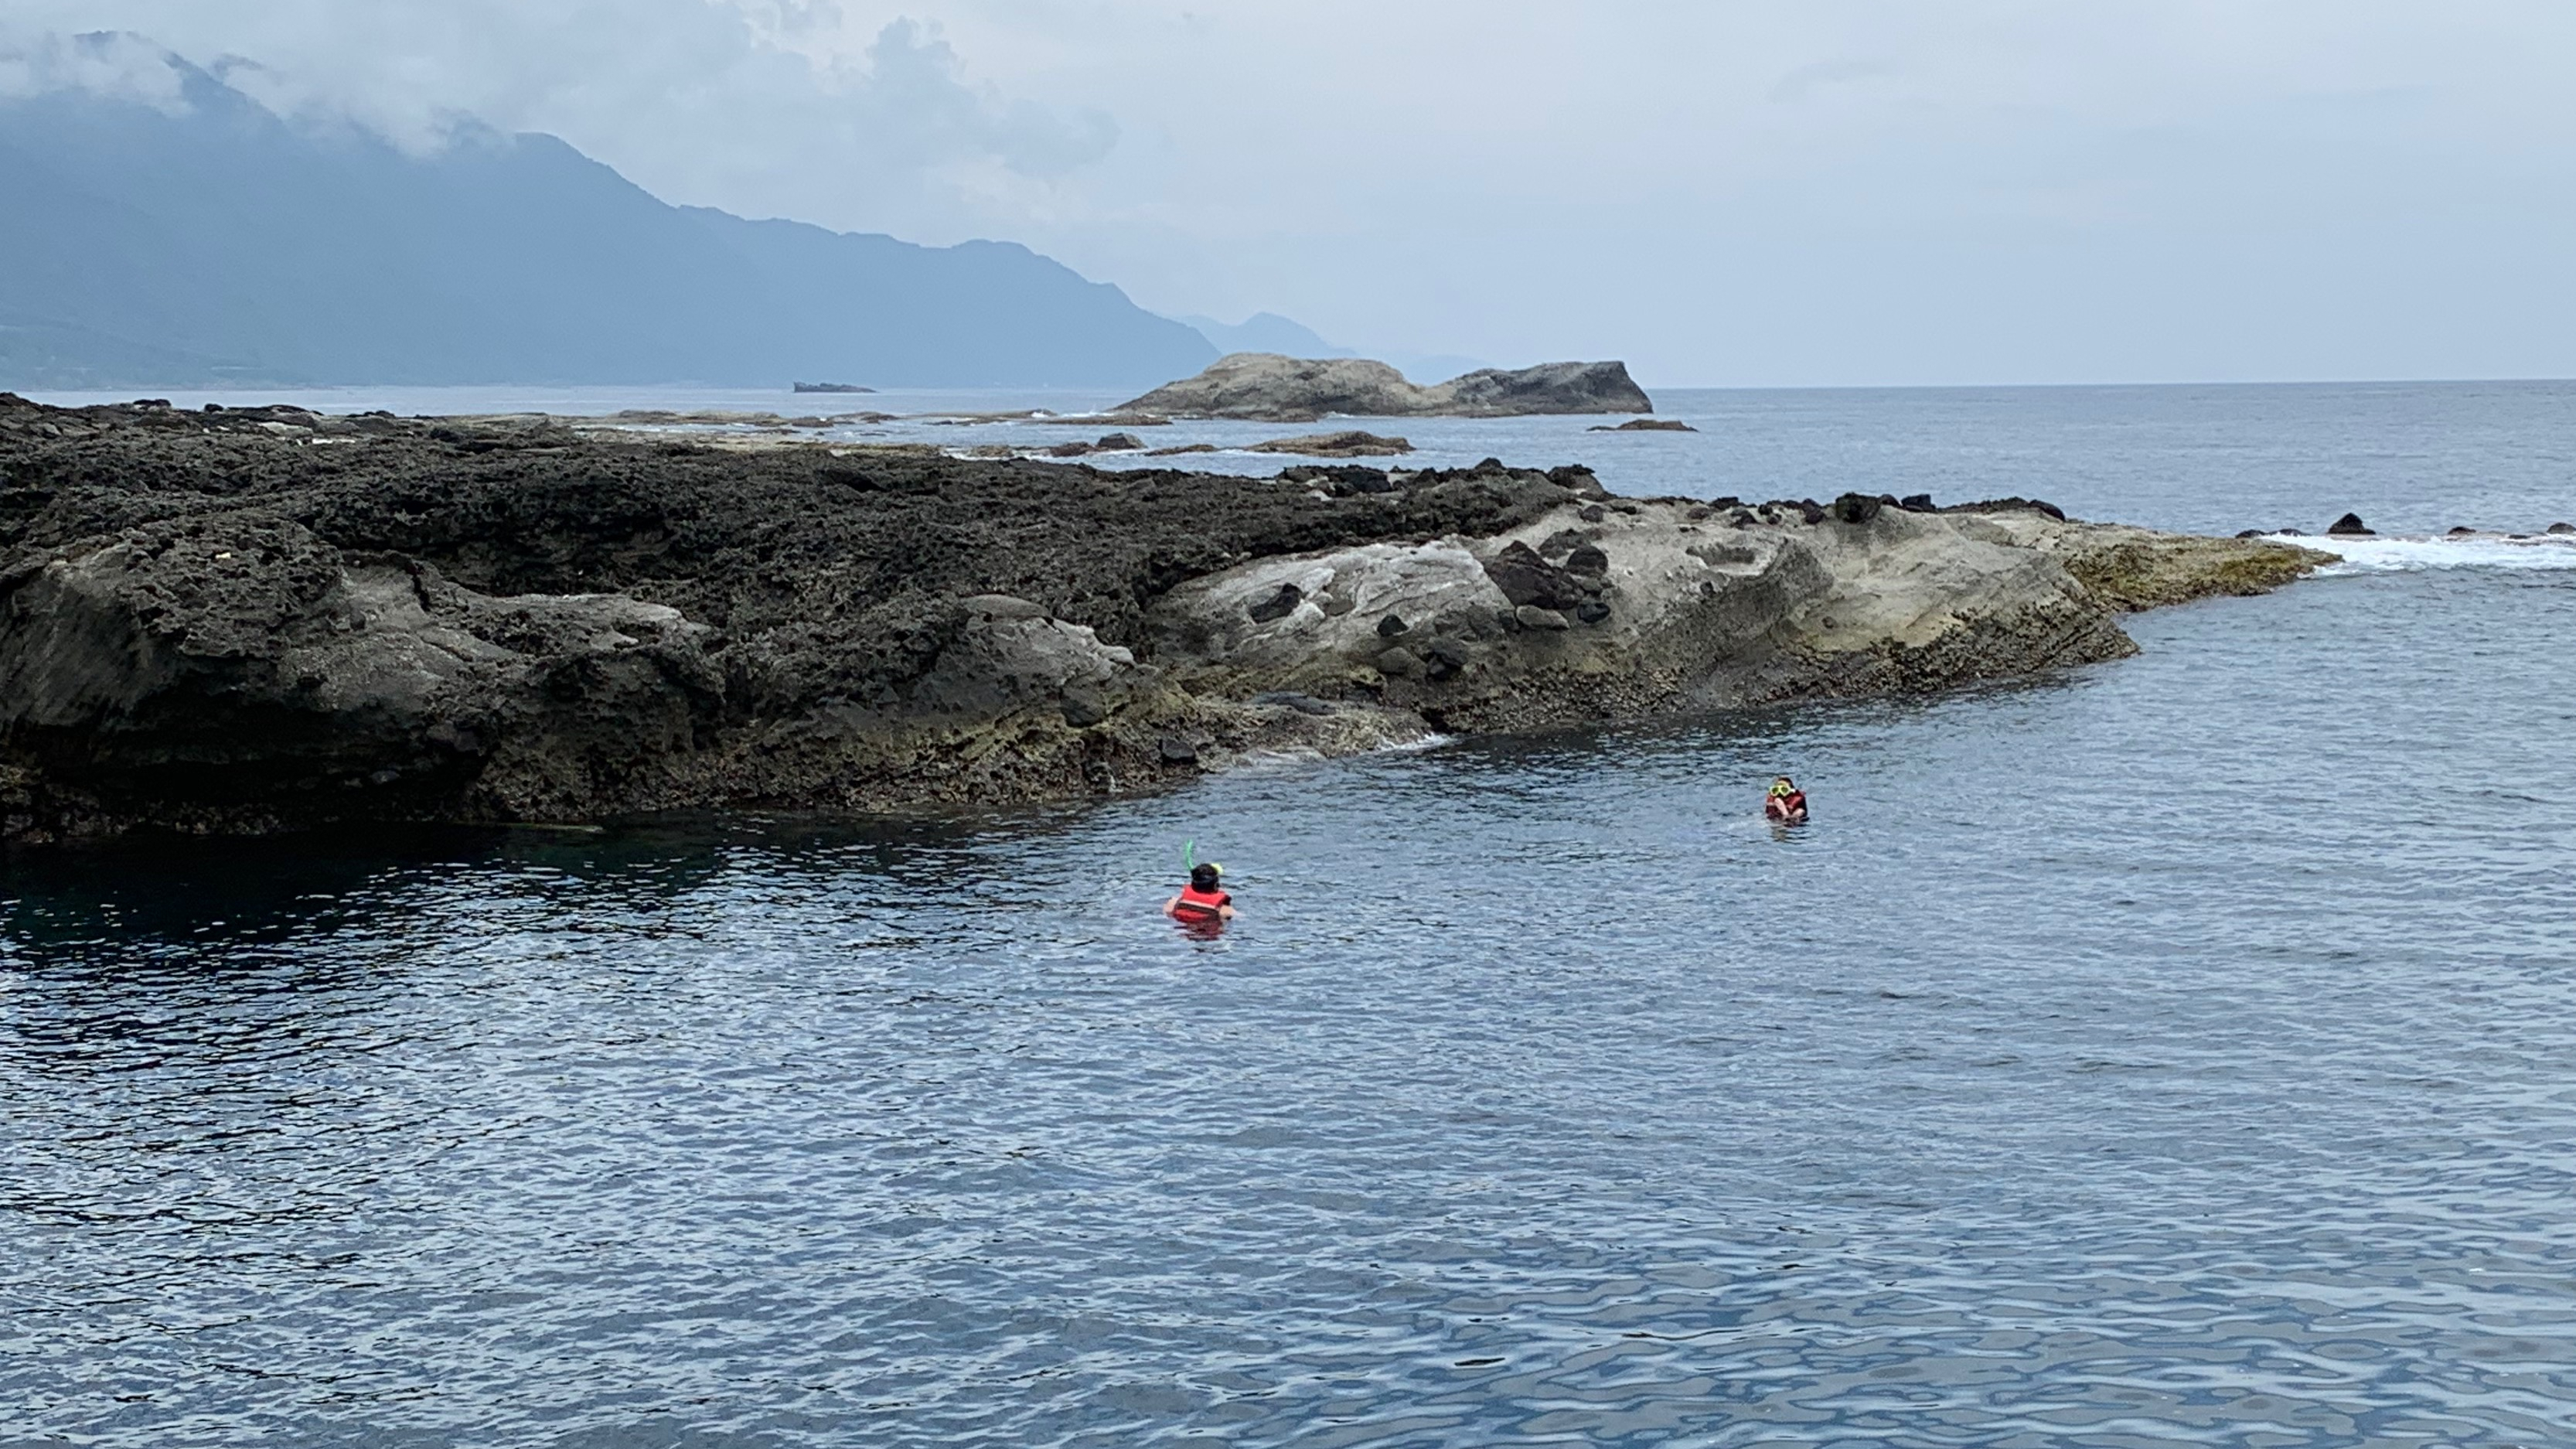 Two students are in the ocean along a rocky and mountainous coast.